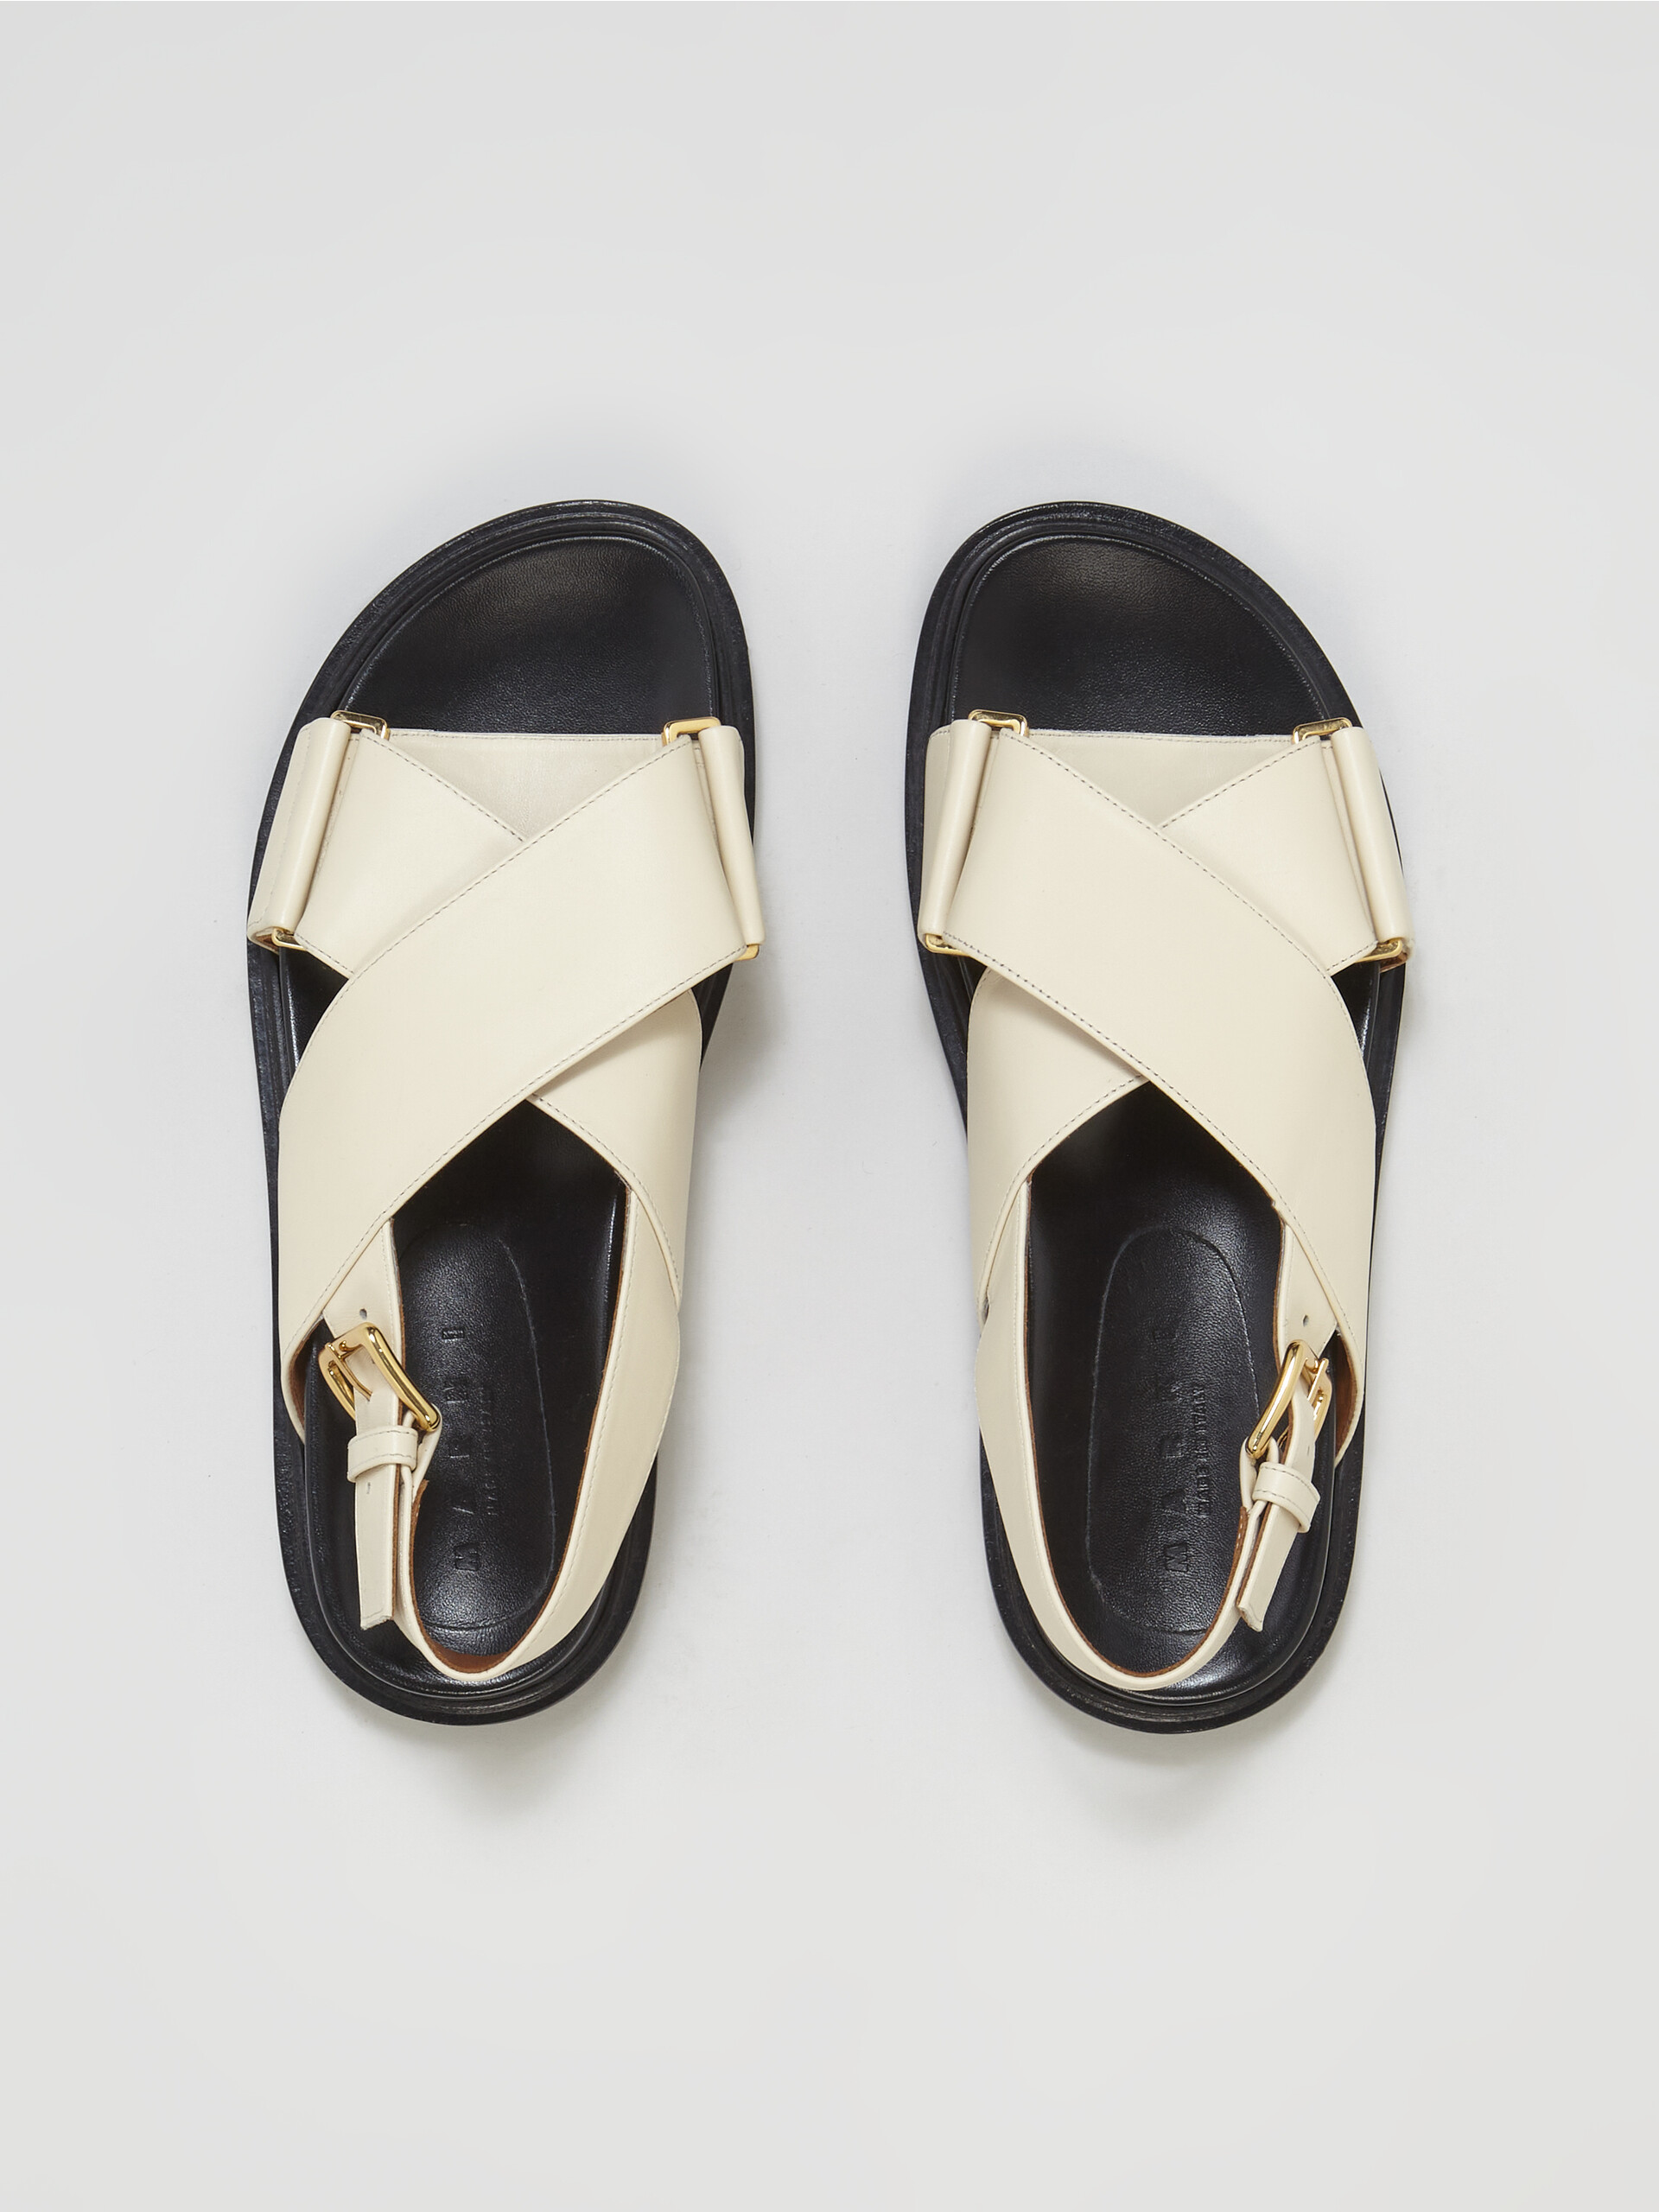 White smooth calf leather fussbett - Sandals - Image 4